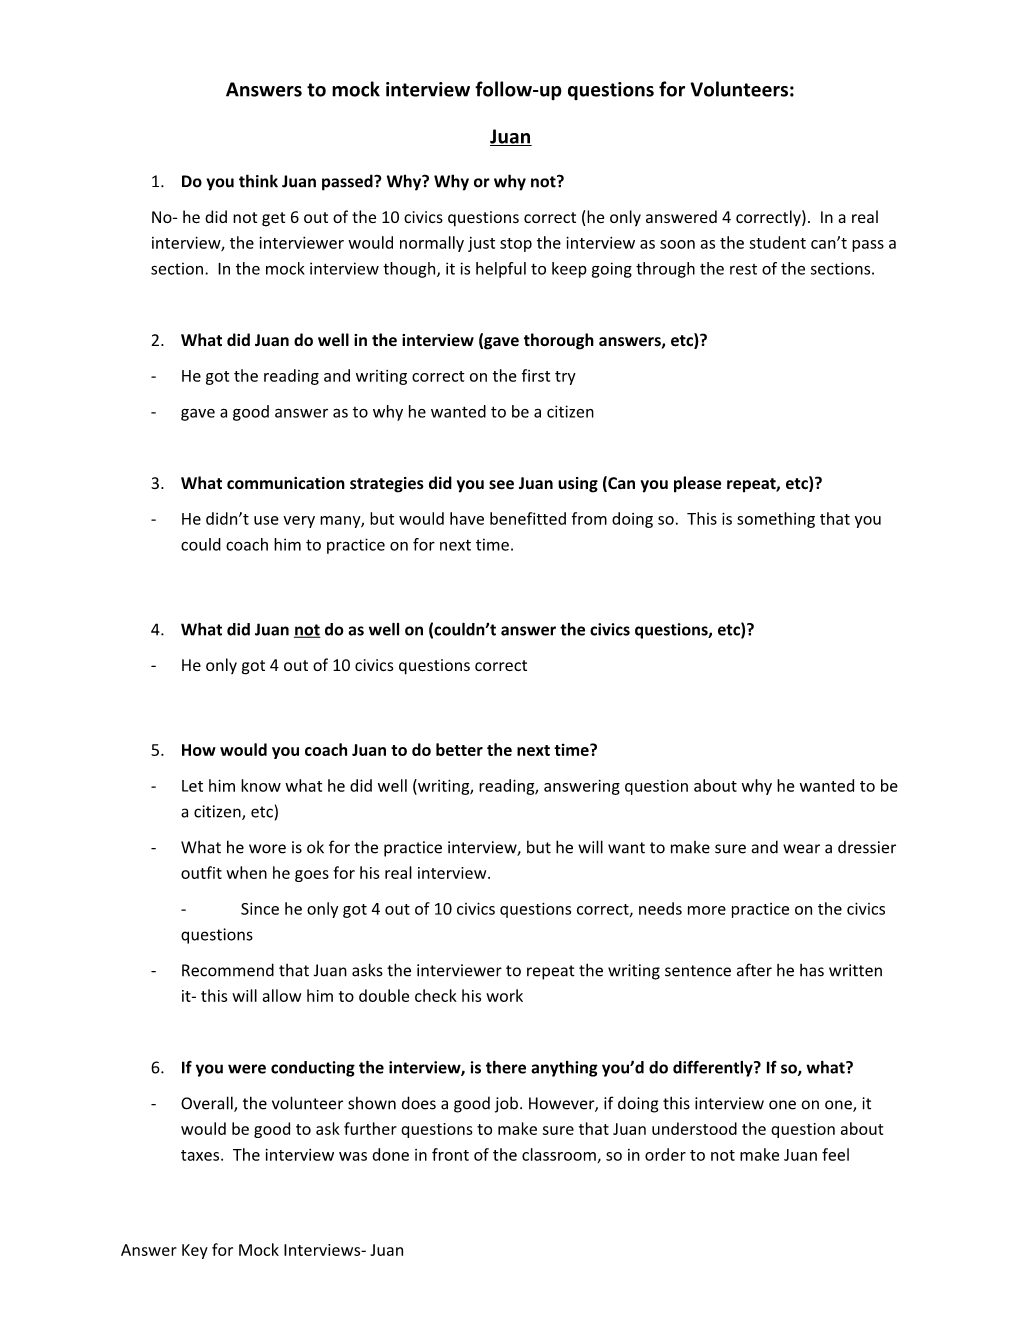 Answers to Mock Interview Follow-Up Questions for Volunteers